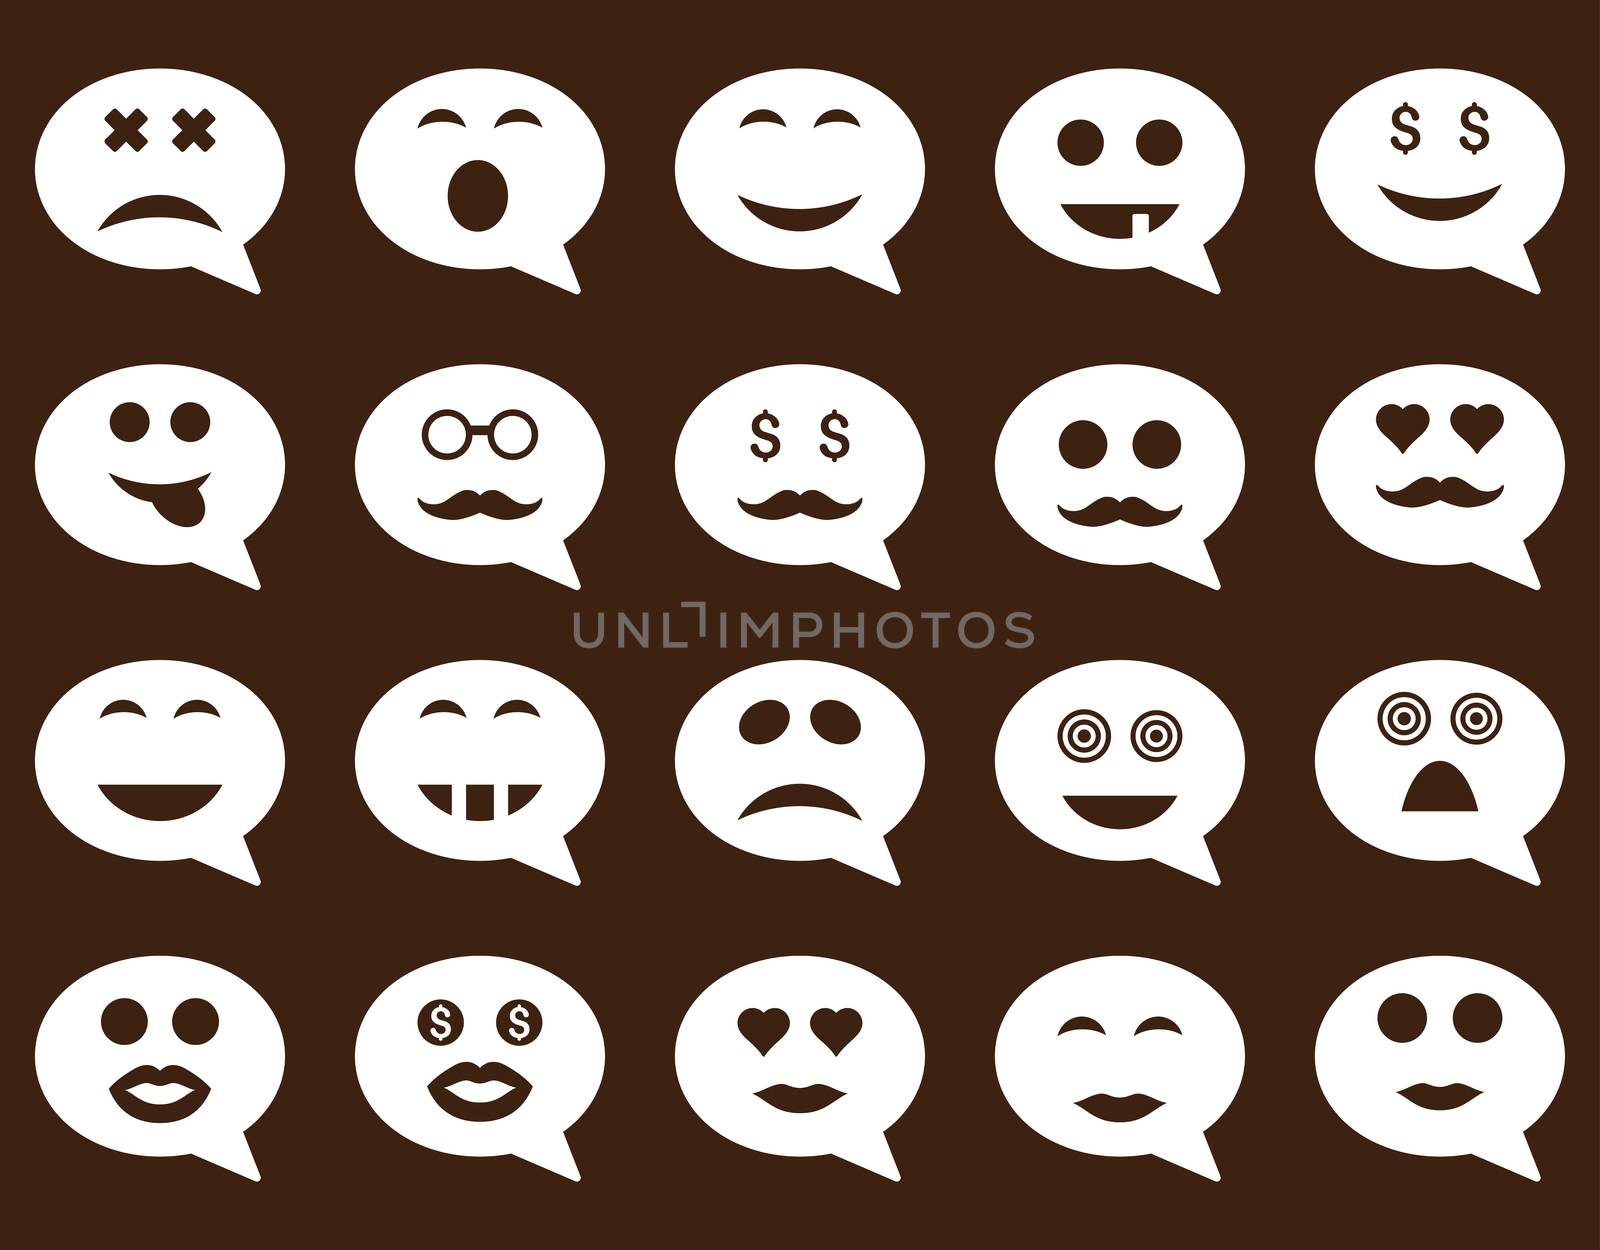 Chat emotion smile icons. Glyph set style is flat images, white symbols, isolated on a brown background.